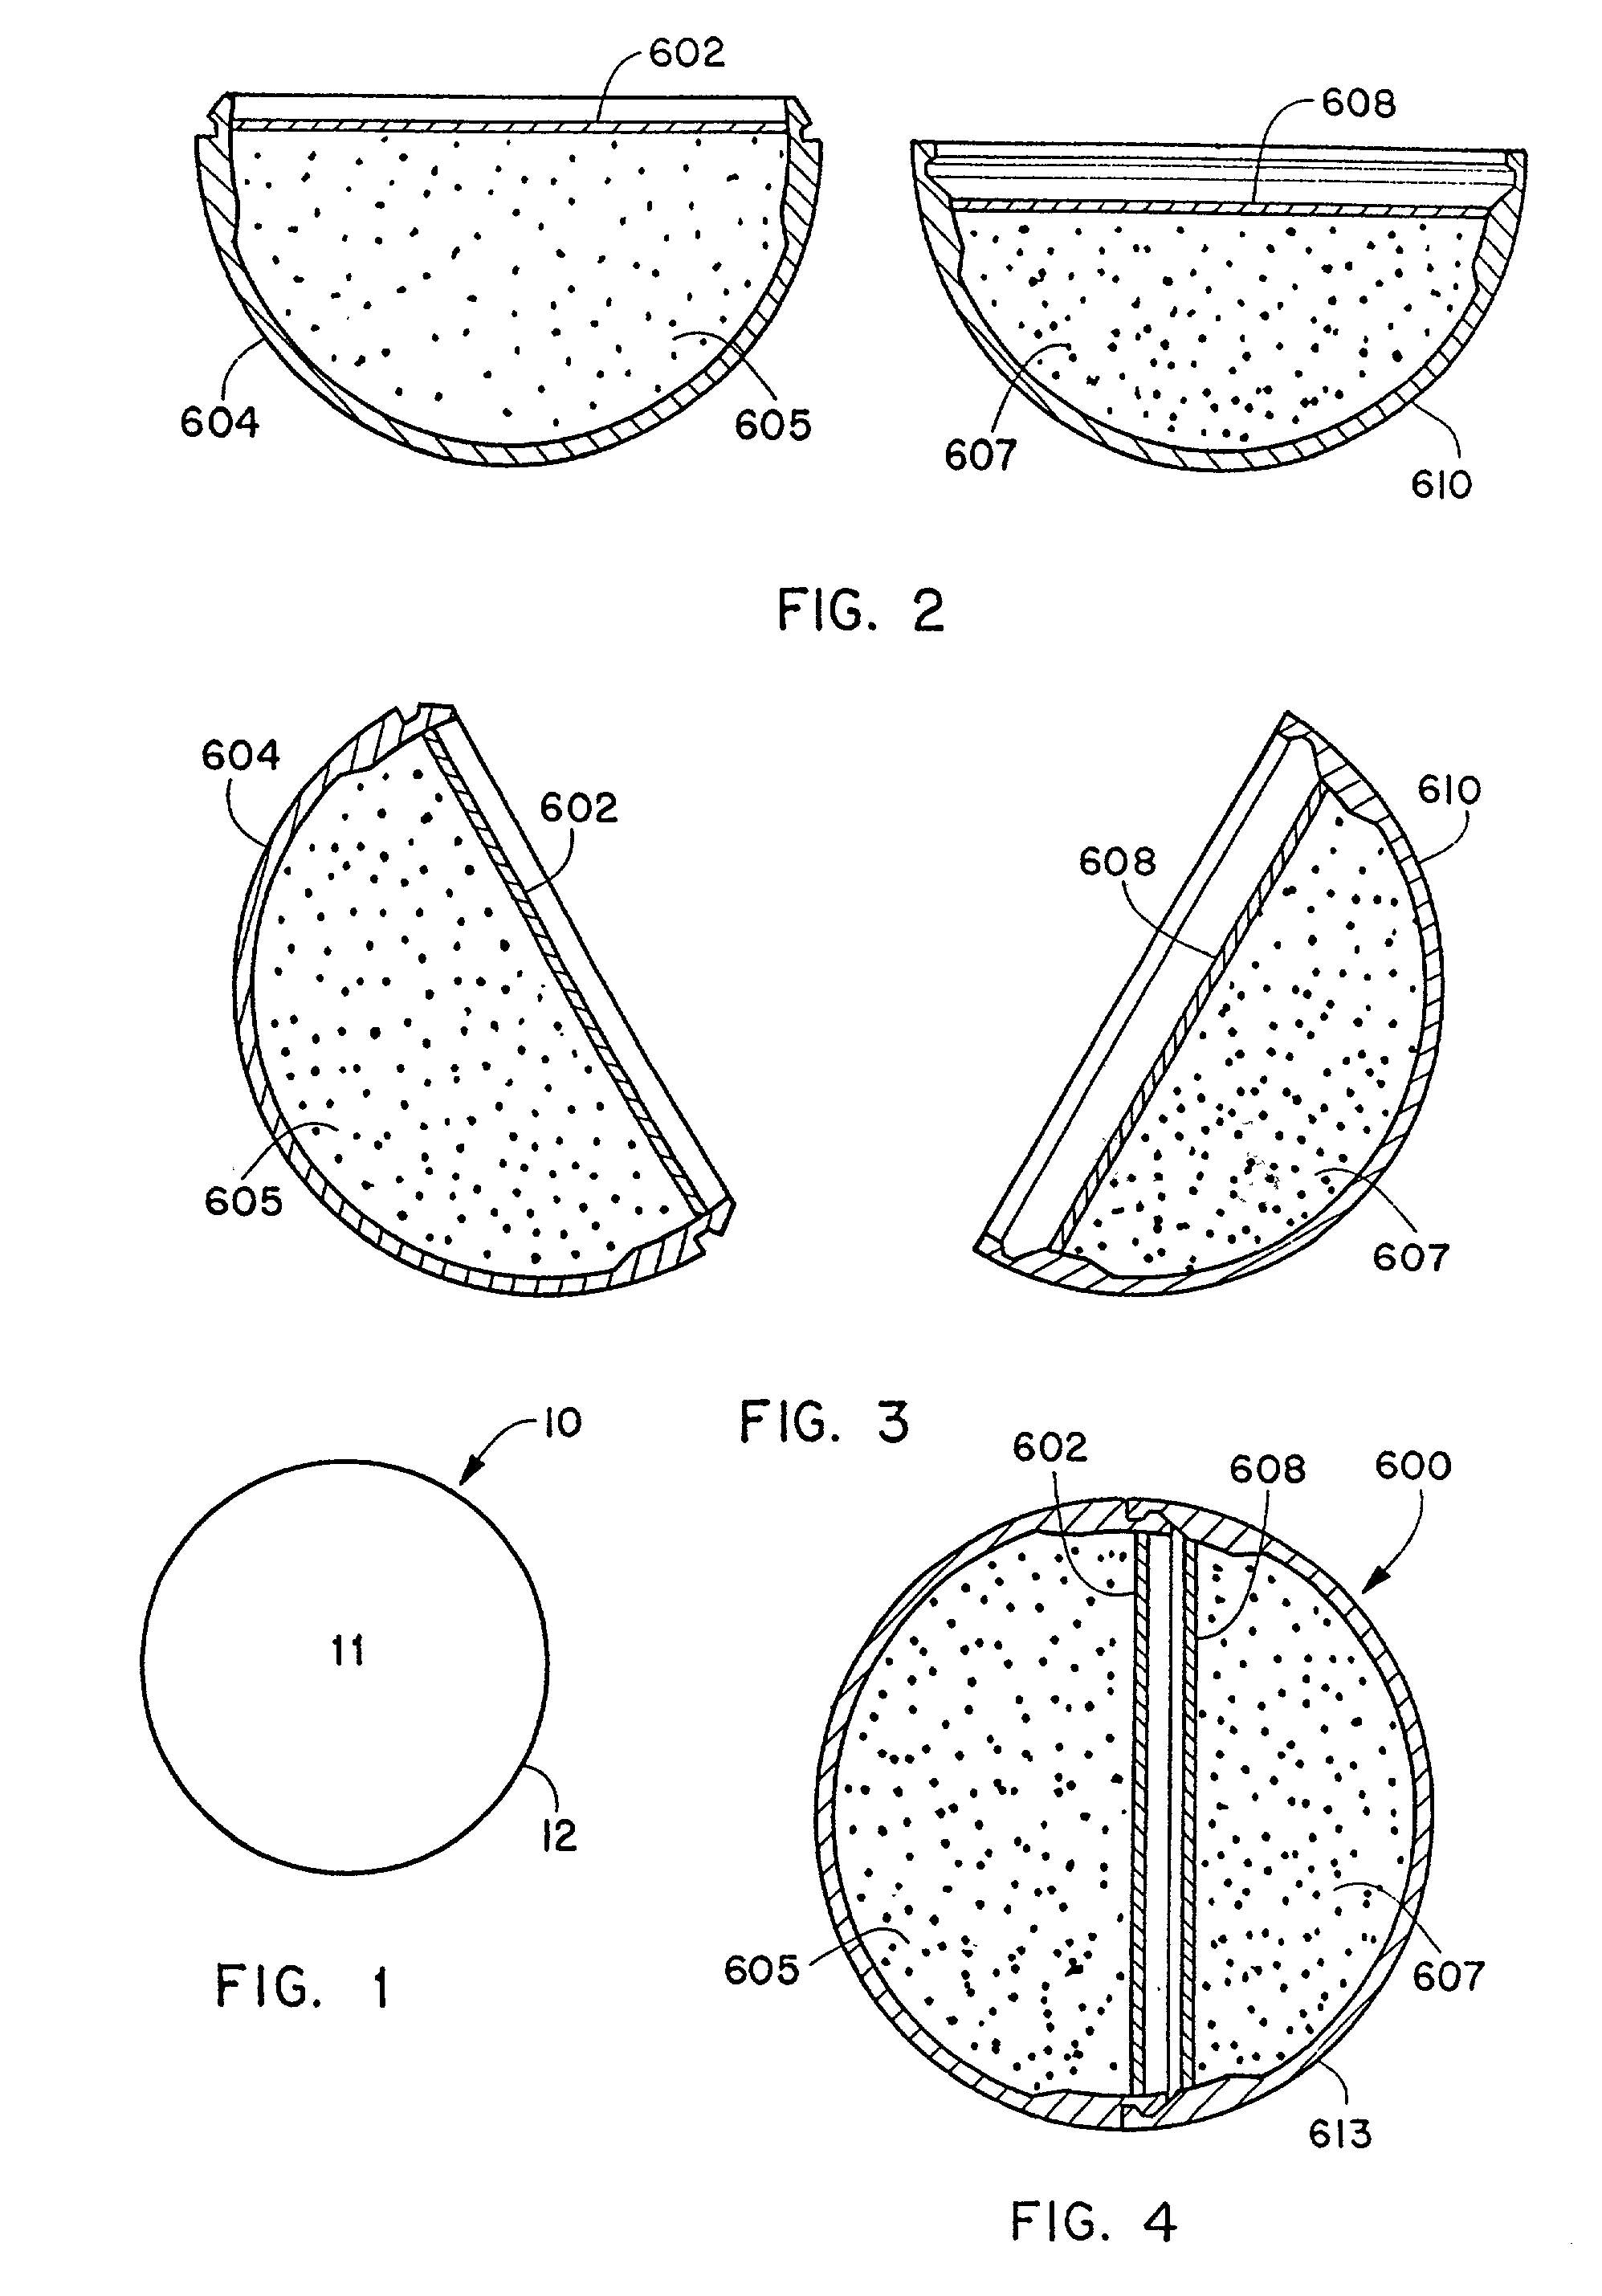 Non-lethal projectile for delivering an inhibiting substance to a living target